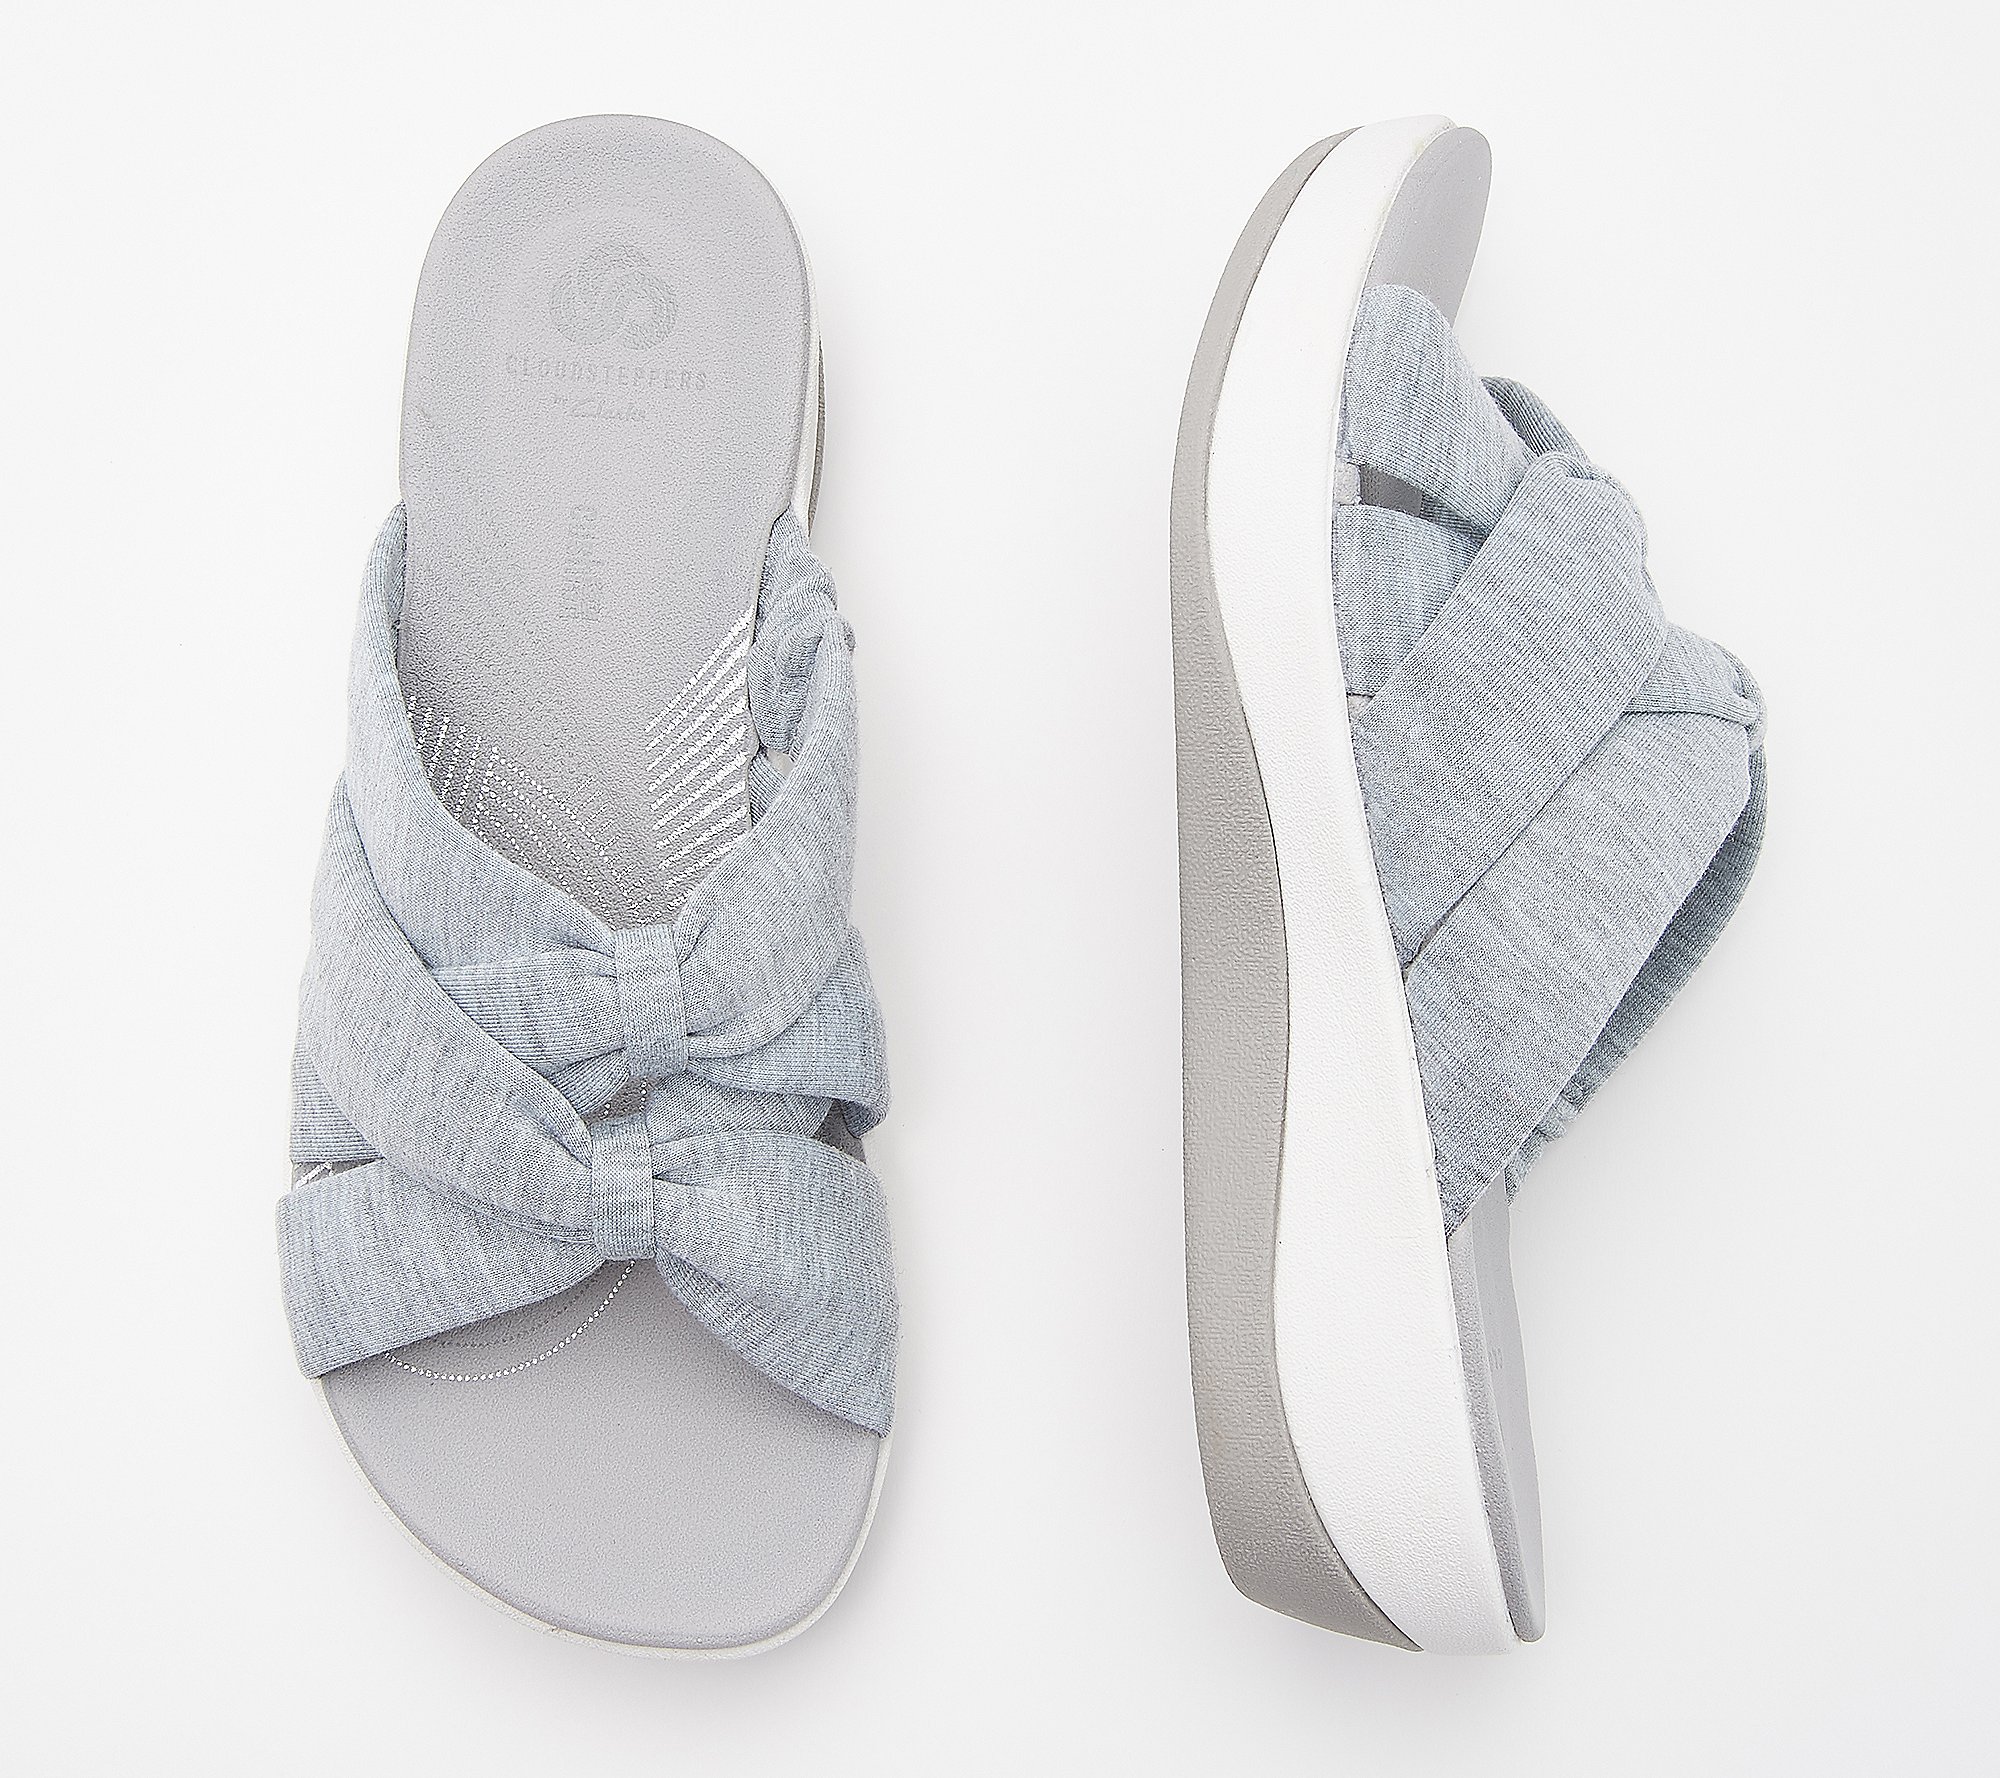 CLOUDSTEPPERS by Clarks Jersey Slide Sandals - Arla Dristi - QVC.com